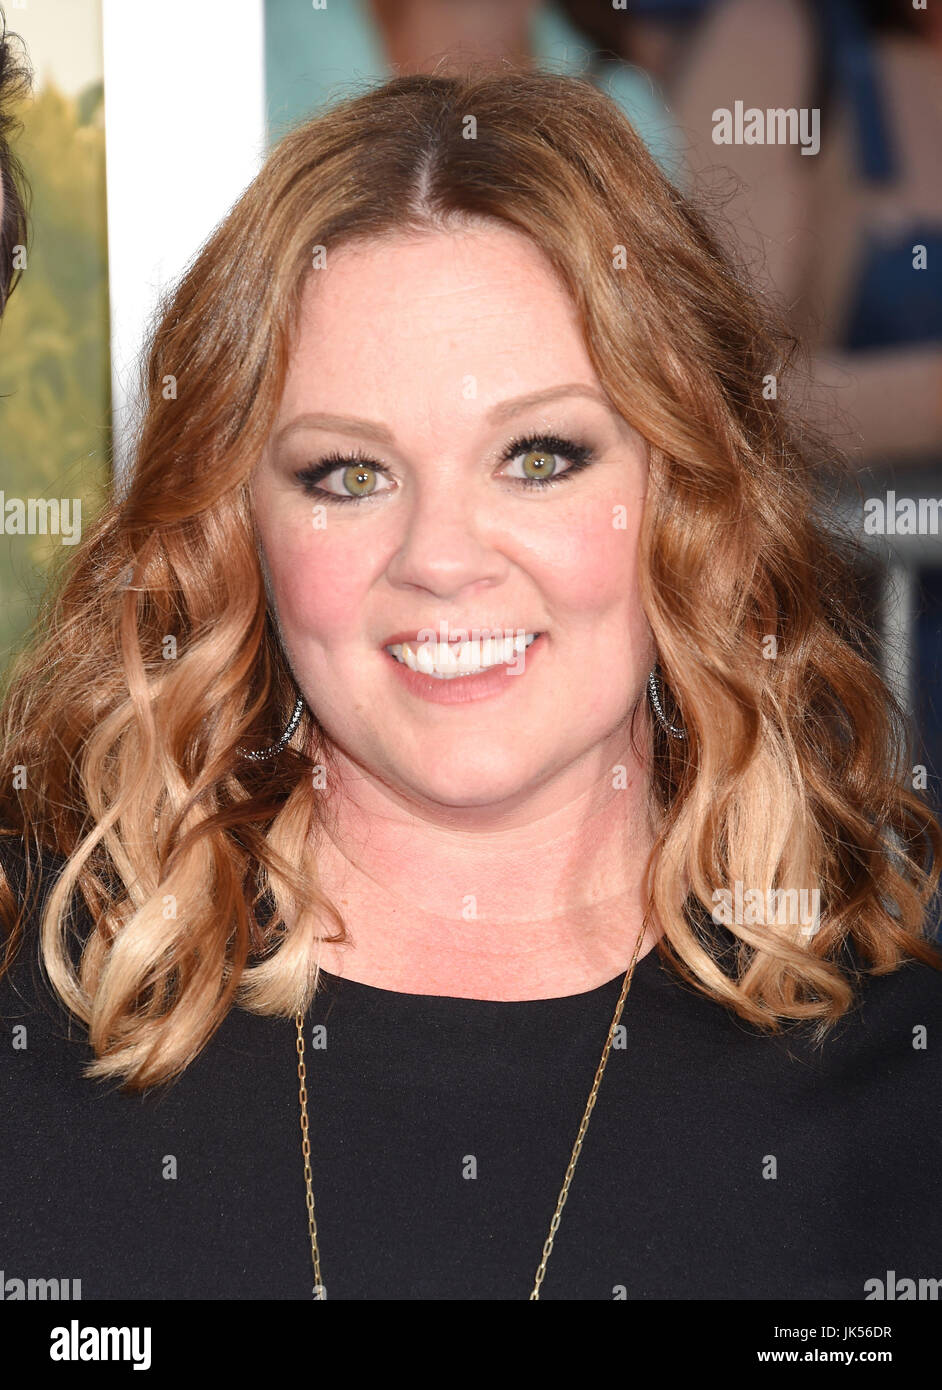 Melissa mccarthy hi-res stock photography and images - Alamy